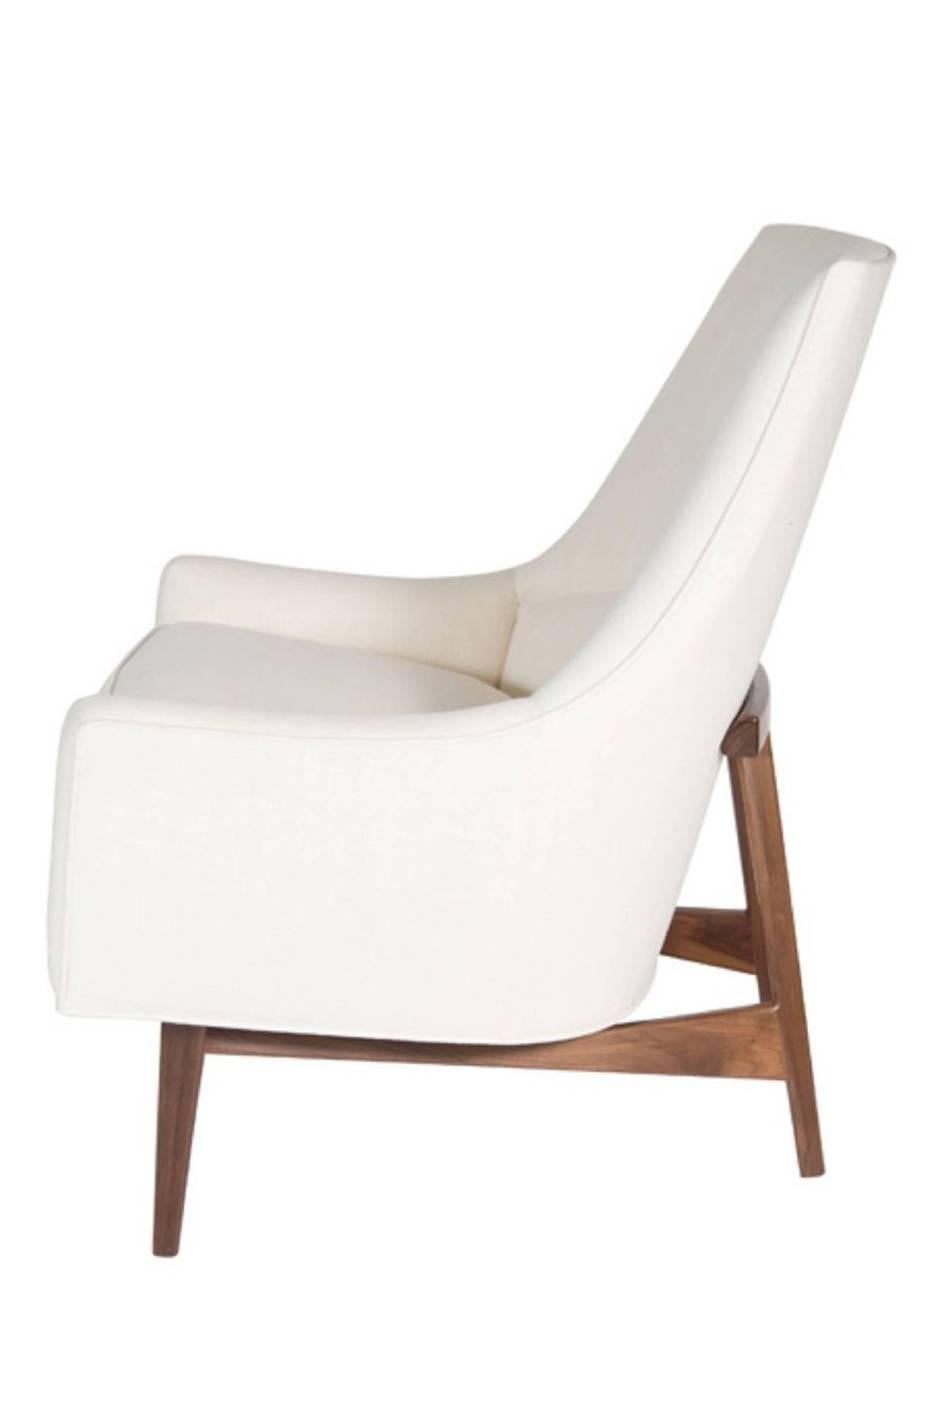 American Pair of Cedrick Lounge Chairs For Sale